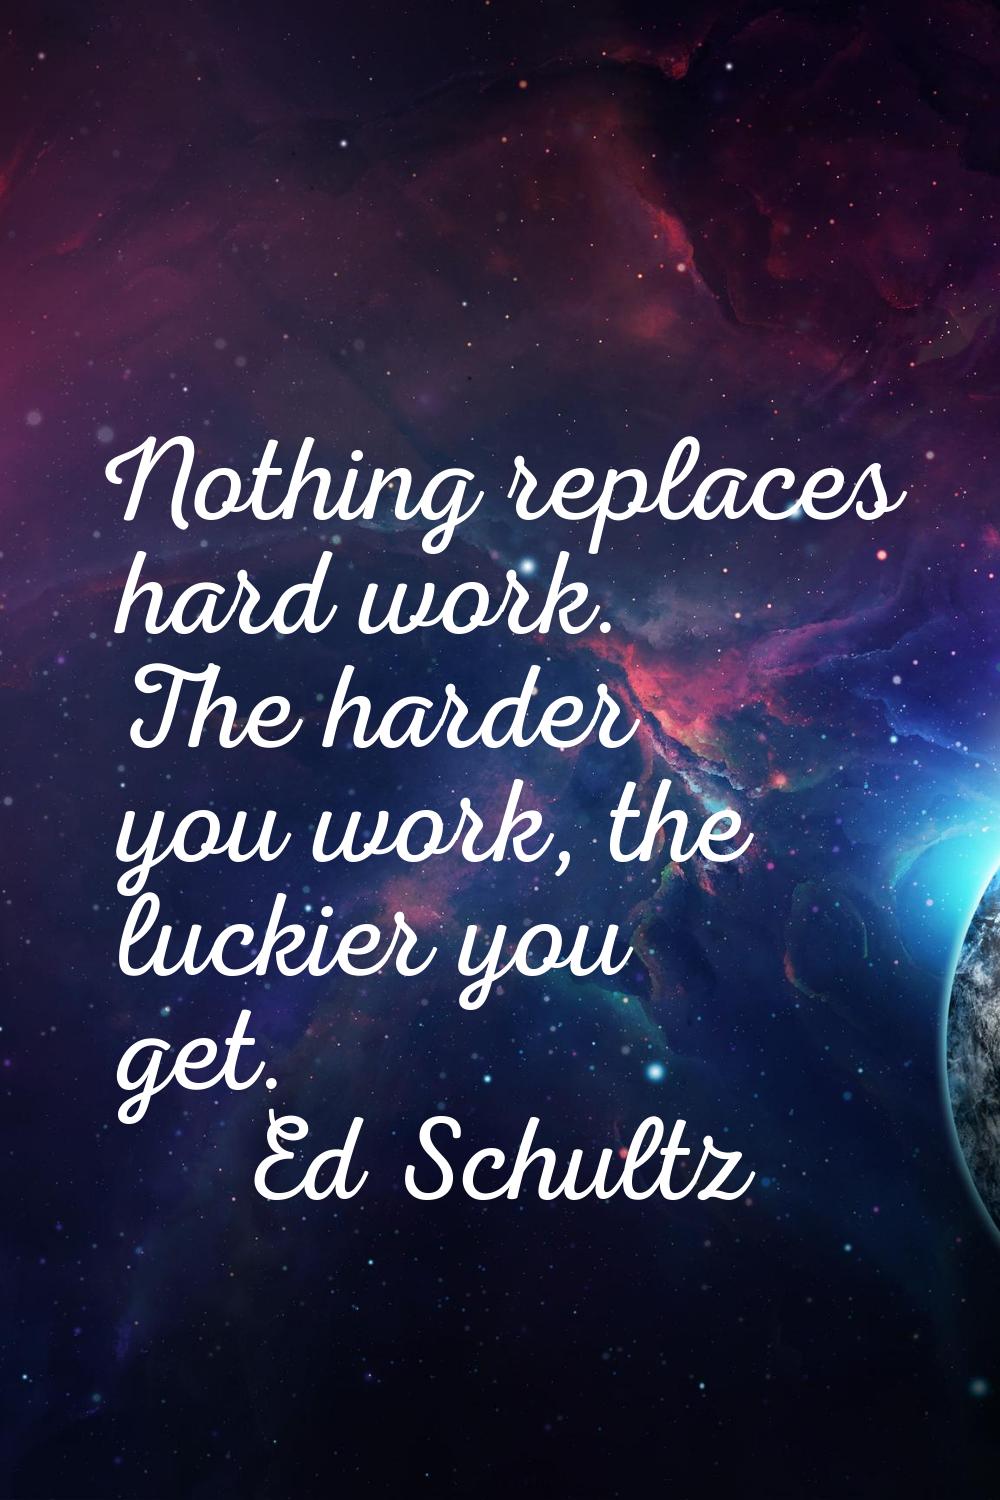 Nothing replaces hard work. The harder you work, the luckier you get.